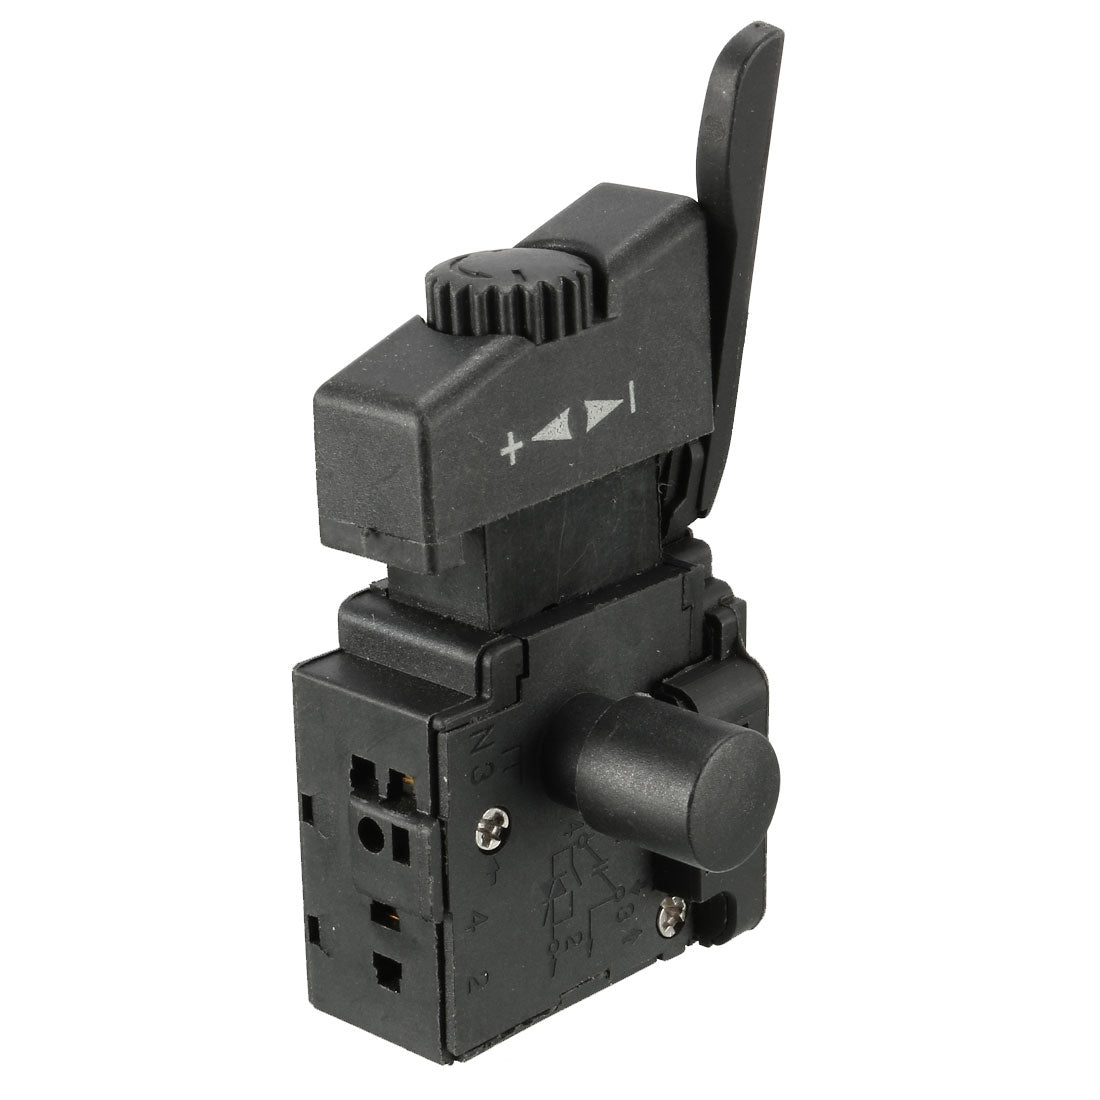 uxcell Uxcell RG5 SPST Lock on Power Tool Trigger Button Switch Black